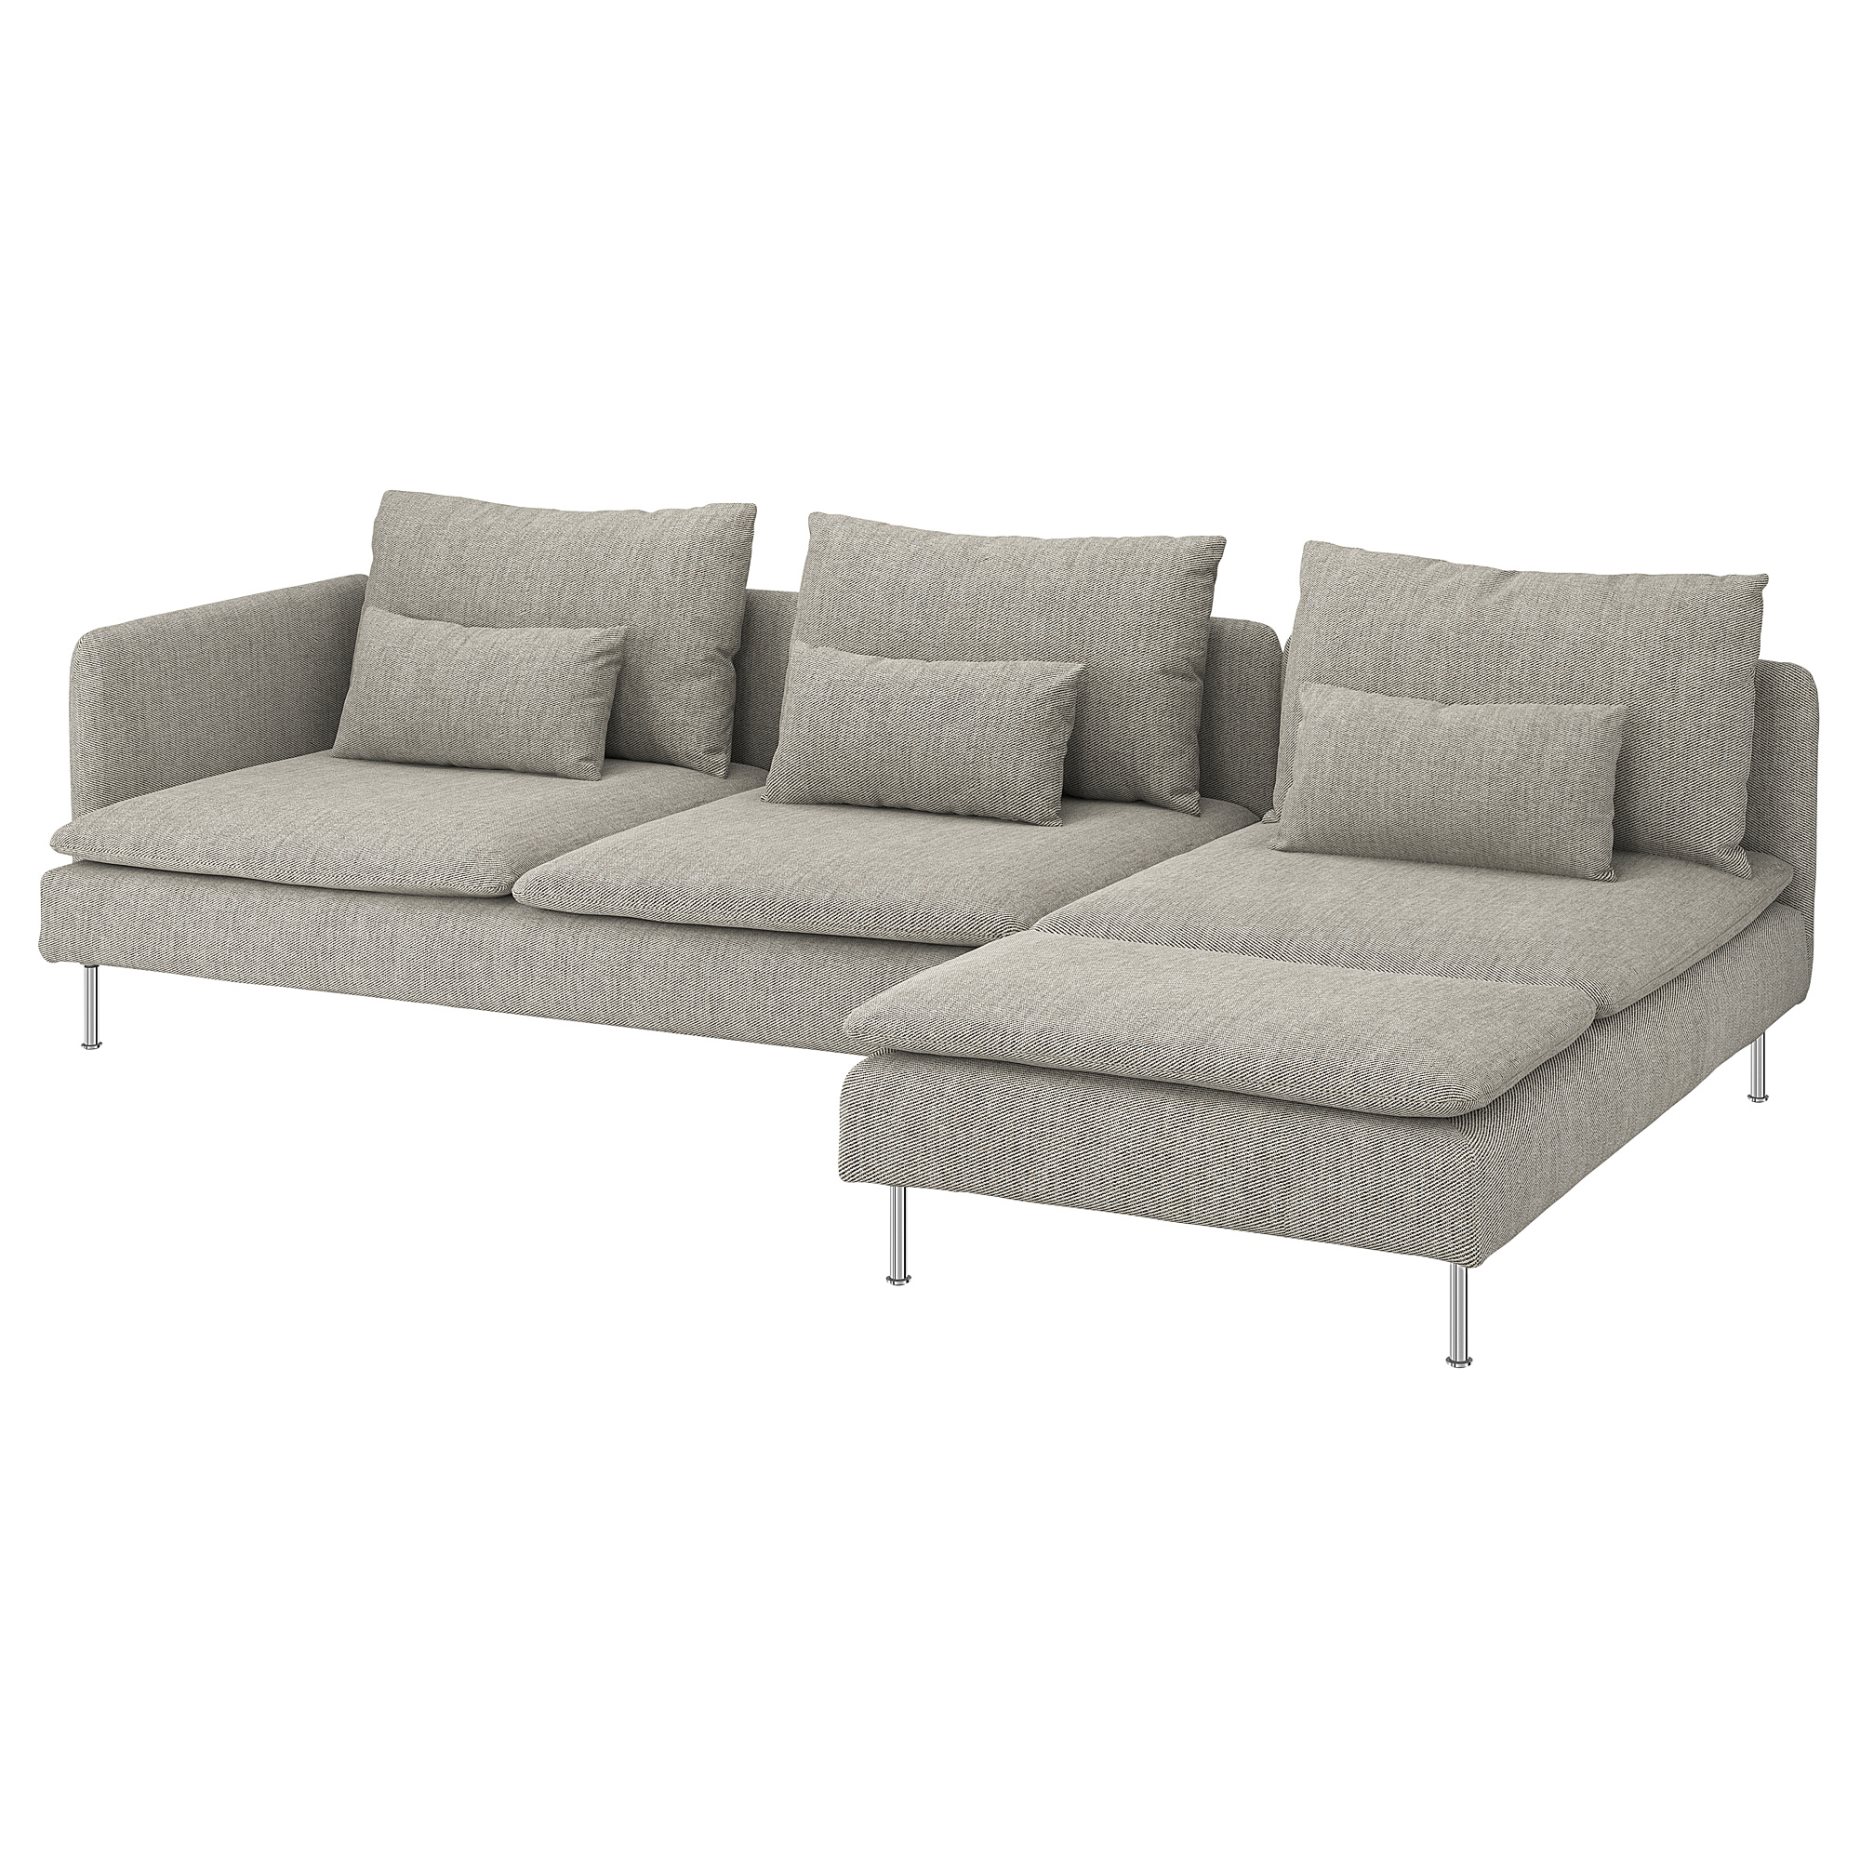 SÖDERHAMN, 4-seat sofa with chaise longue and open end, 293.058.16